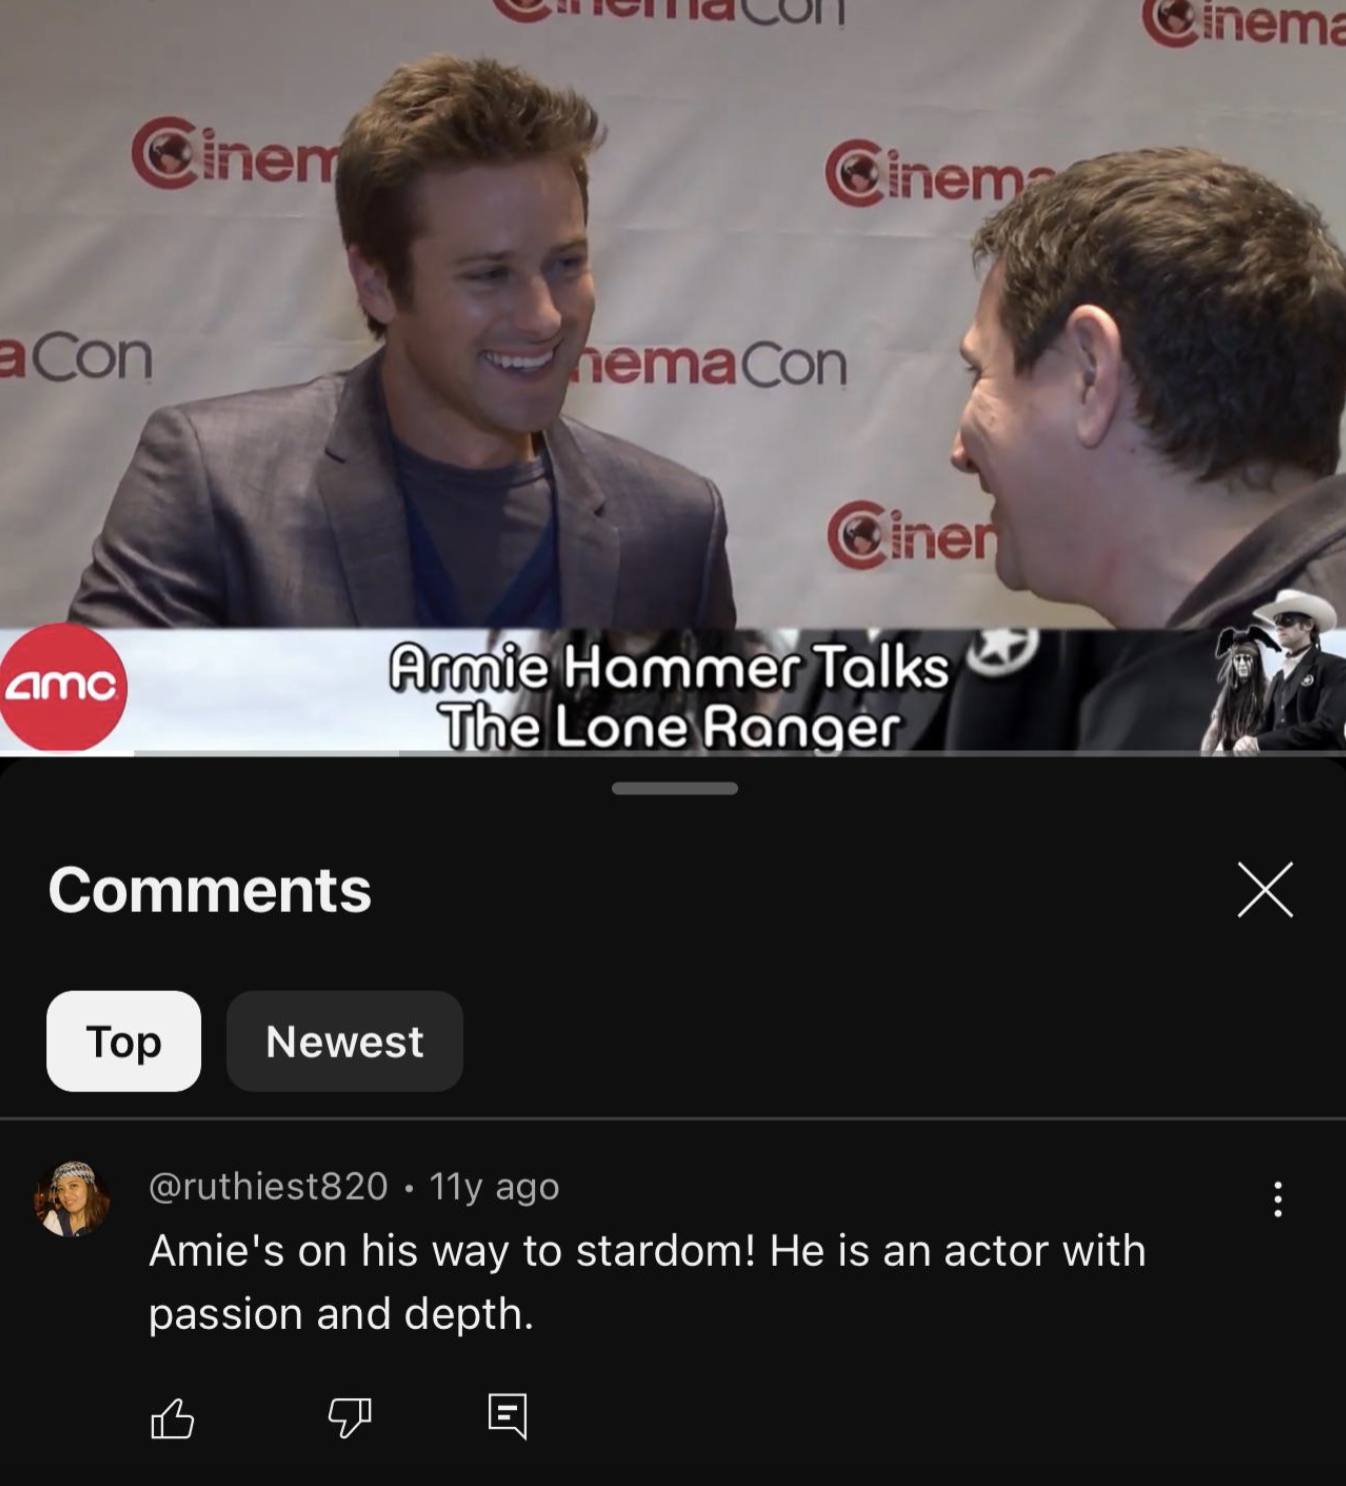 screenshot - Cinem aCon Cinema nemaCon Ciner inema amo Armie Hammer Talks The Lone Ranger Newest . 11y ago Amie's on his way to stardom! He is an actor with passion and depth. 1 I